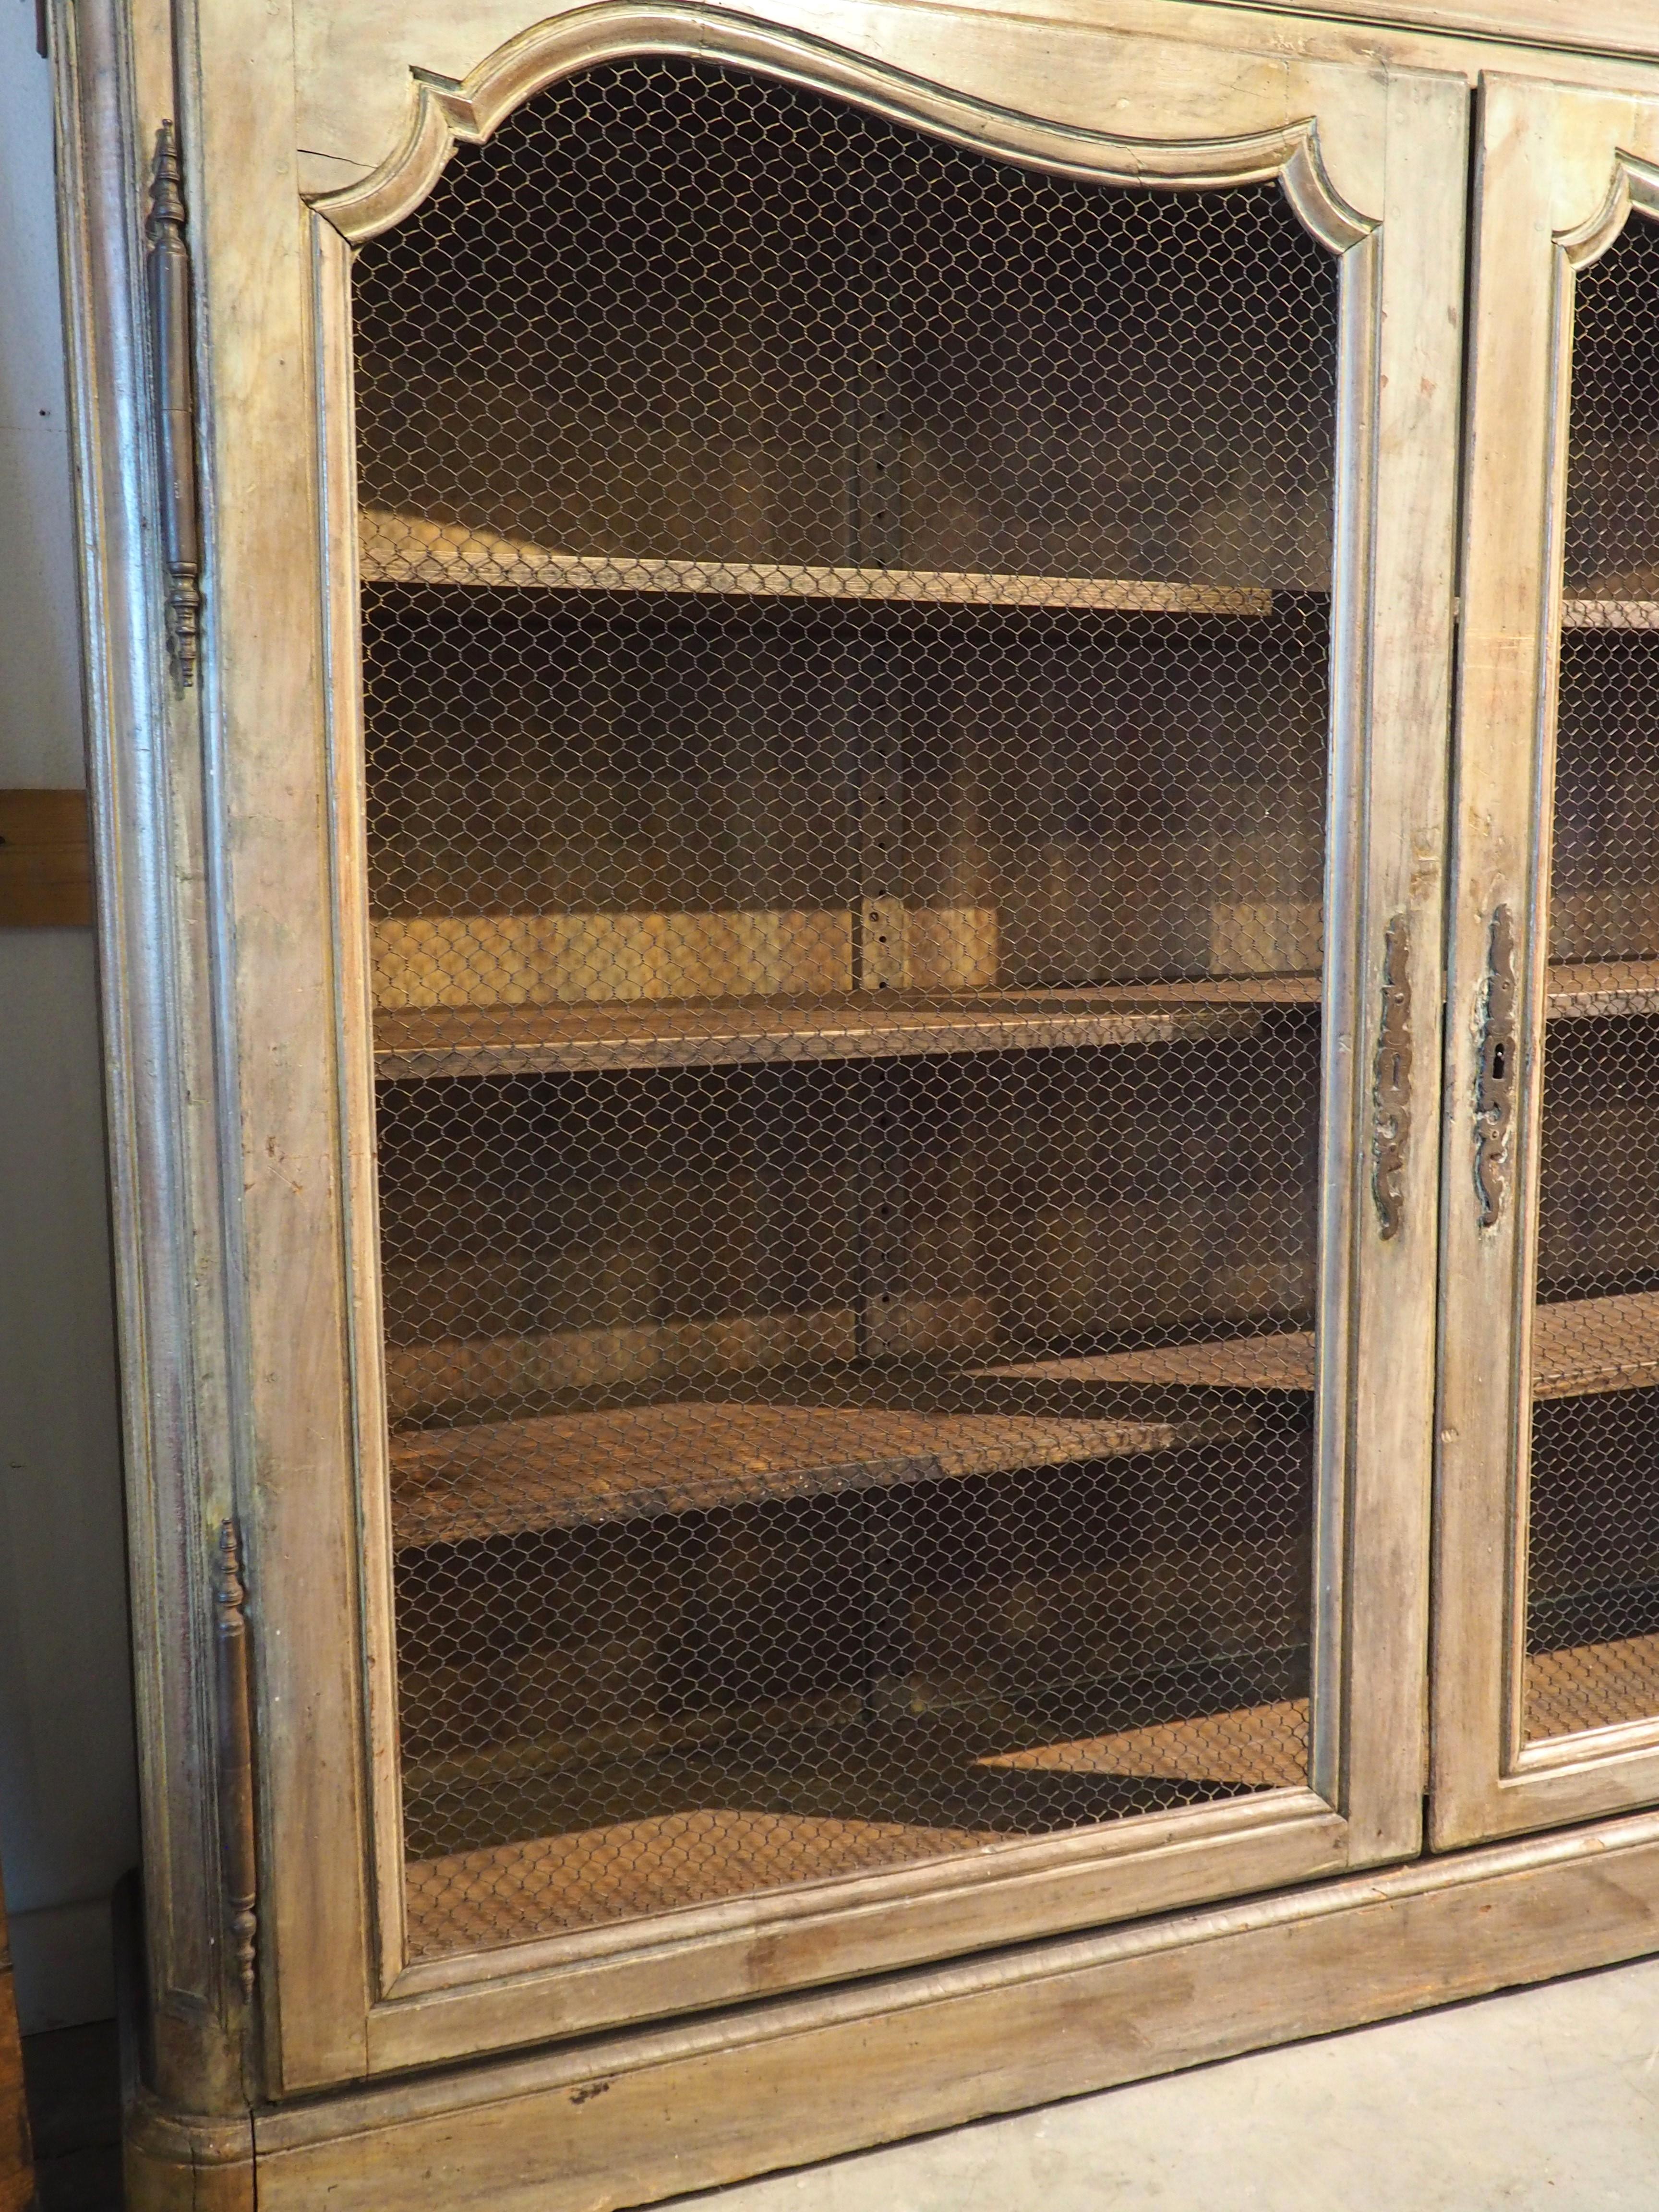 Early 19th Century French Bibliotheque Cabinet with Wire Mesh Door Panels 8